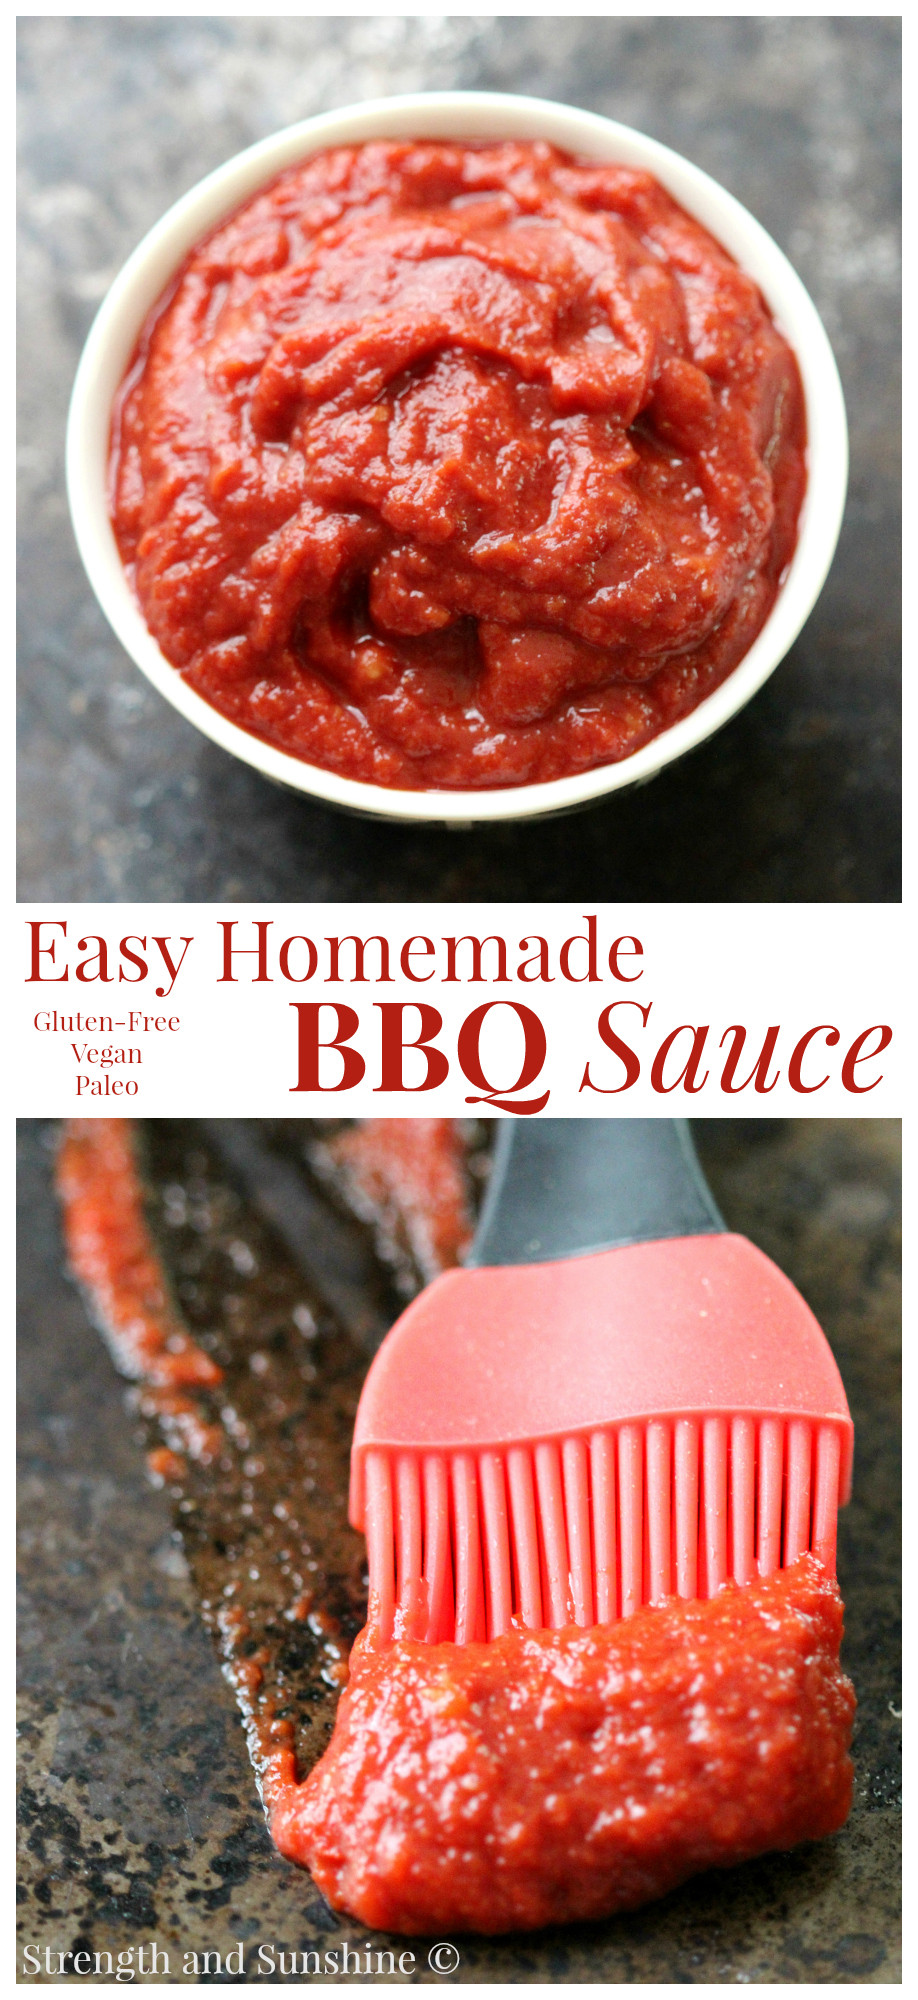 Healthy Bbq Sauce
 healthy barbecue sauce brands